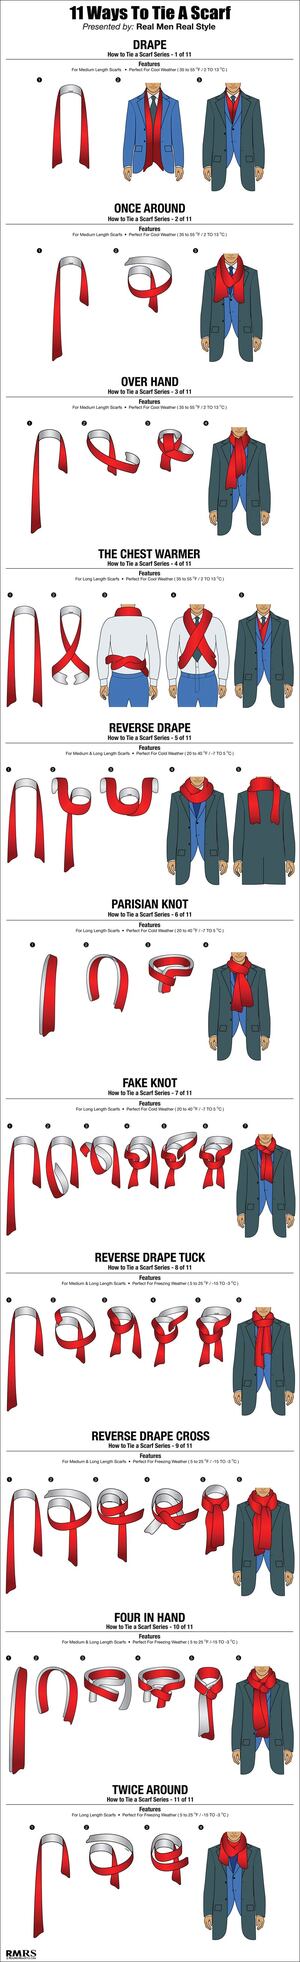 11-Ways-To-Tie-A-Scarf-Poster-800